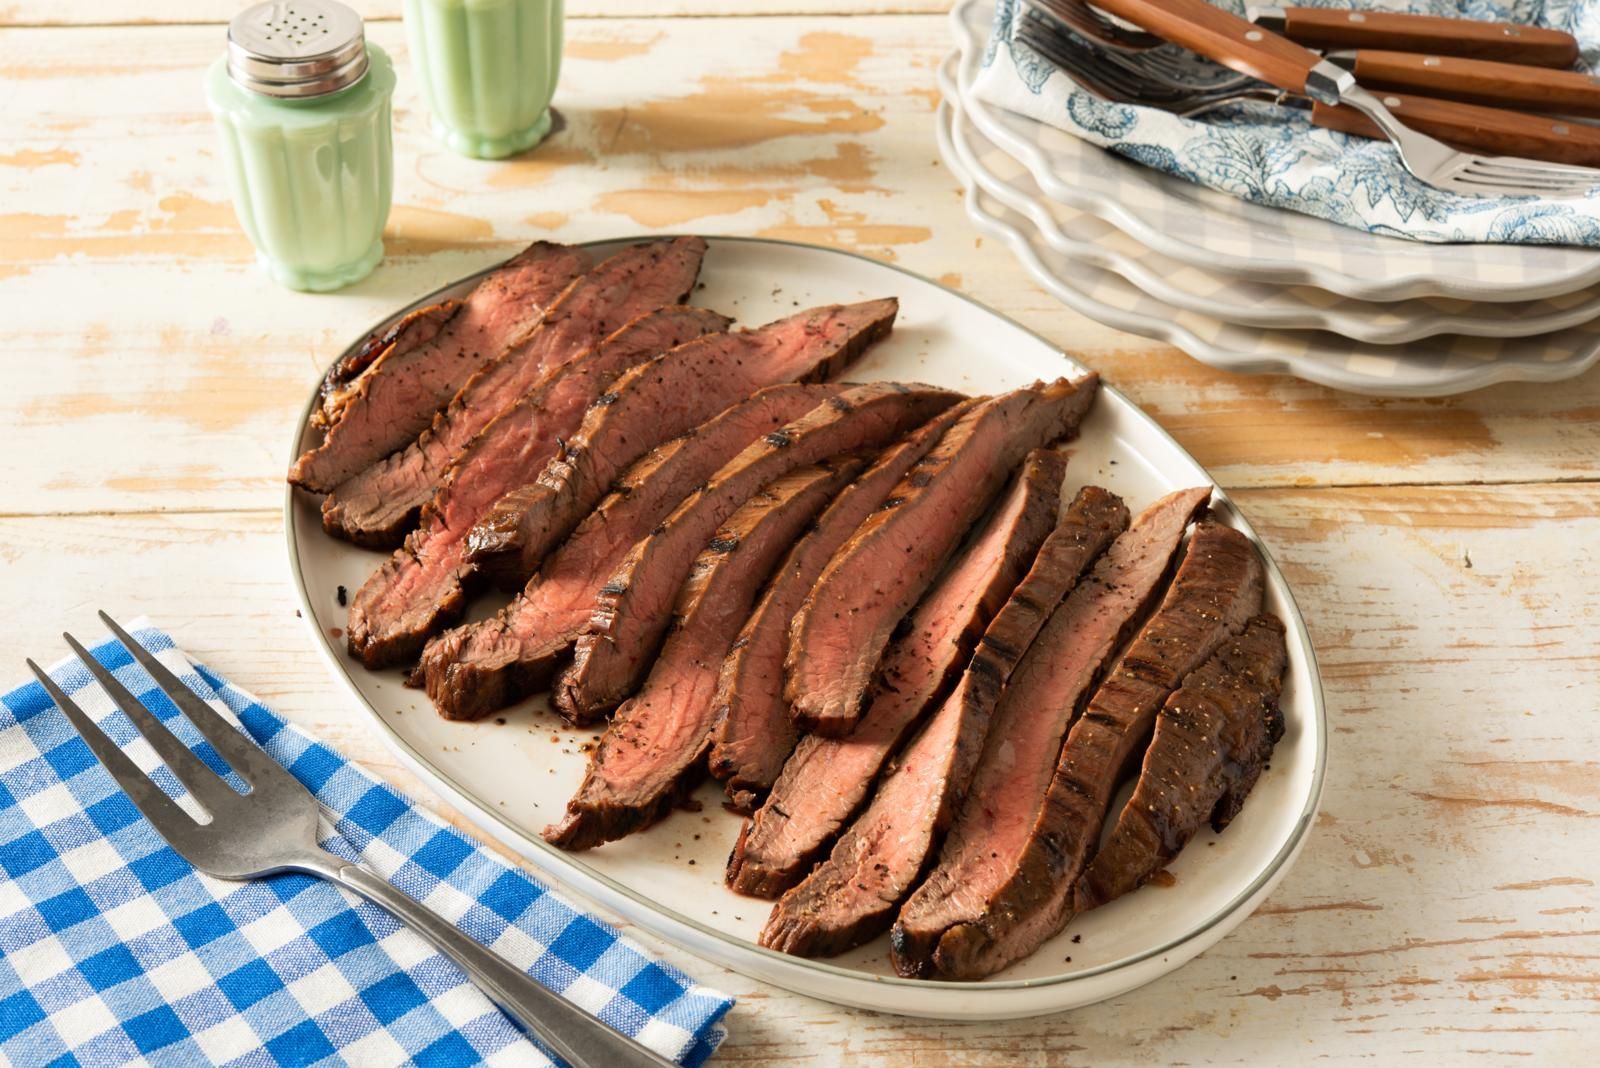 pictures of cooked meat